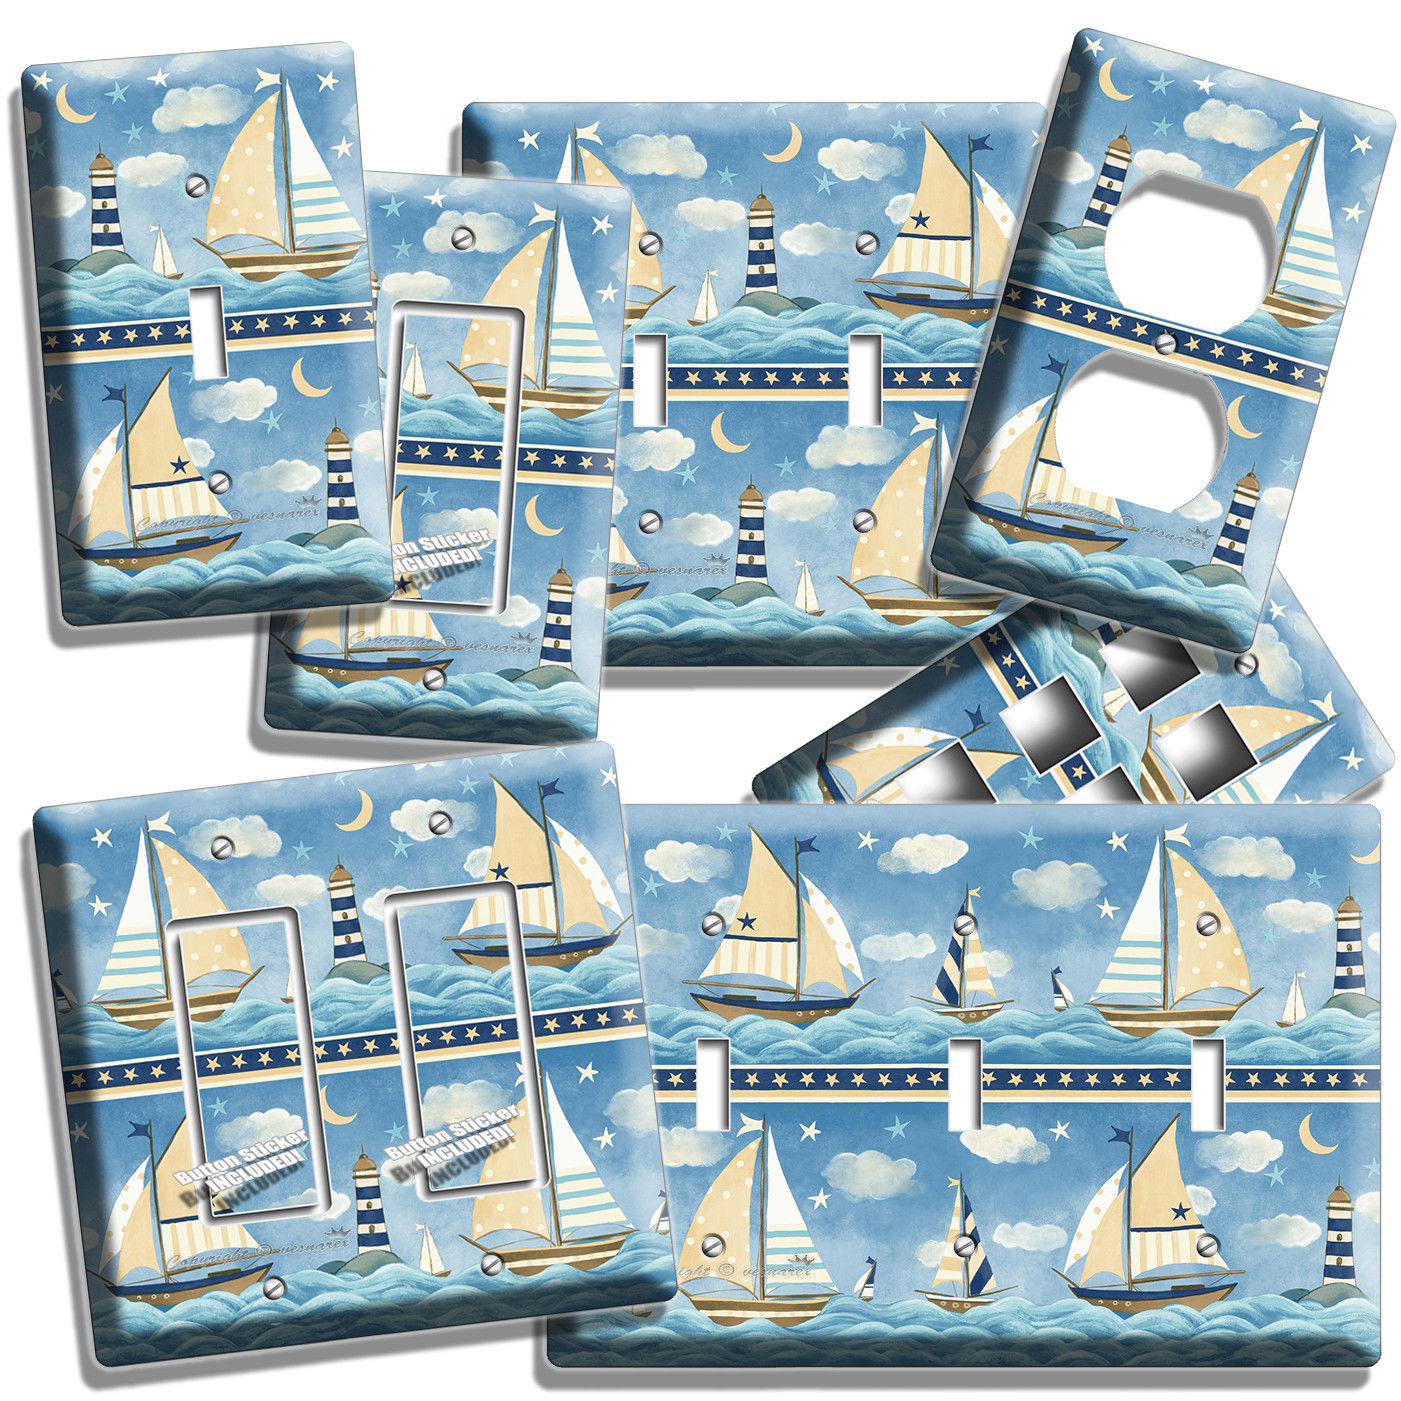 NAUTICAL BABY NURSERY SAILBOATS LIGHT SWITCH OUTLET WALL PLATES ROOM HOUSE DECOR